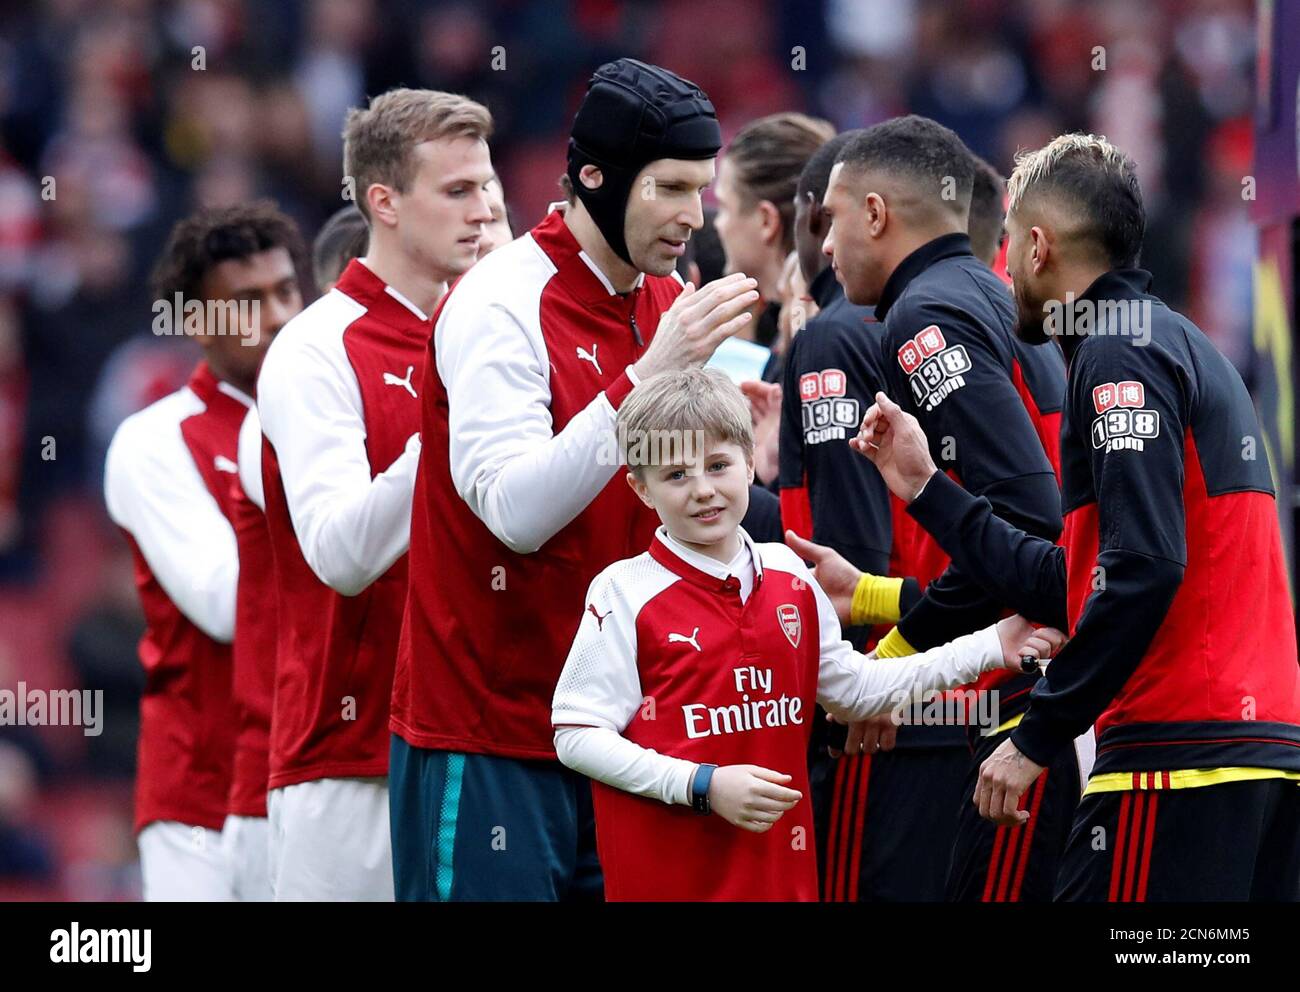 Soccer Football - Premier League - Arsenal vs Watford - Emirates Stadium, London, Britain - March 11, 2018   Arsenal's Petr Cech shakes hands before the match   REUTERS/Eddie Keogh    EDITORIAL USE ONLY. No use with unauthorized audio, video, data, fixture lists, club/league logos or "live" services. Online in-match use limited to 75 images, no video emulation. No use in betting, games or single club/league/player publications.  Please contact your account representative for further details. Stock Photo